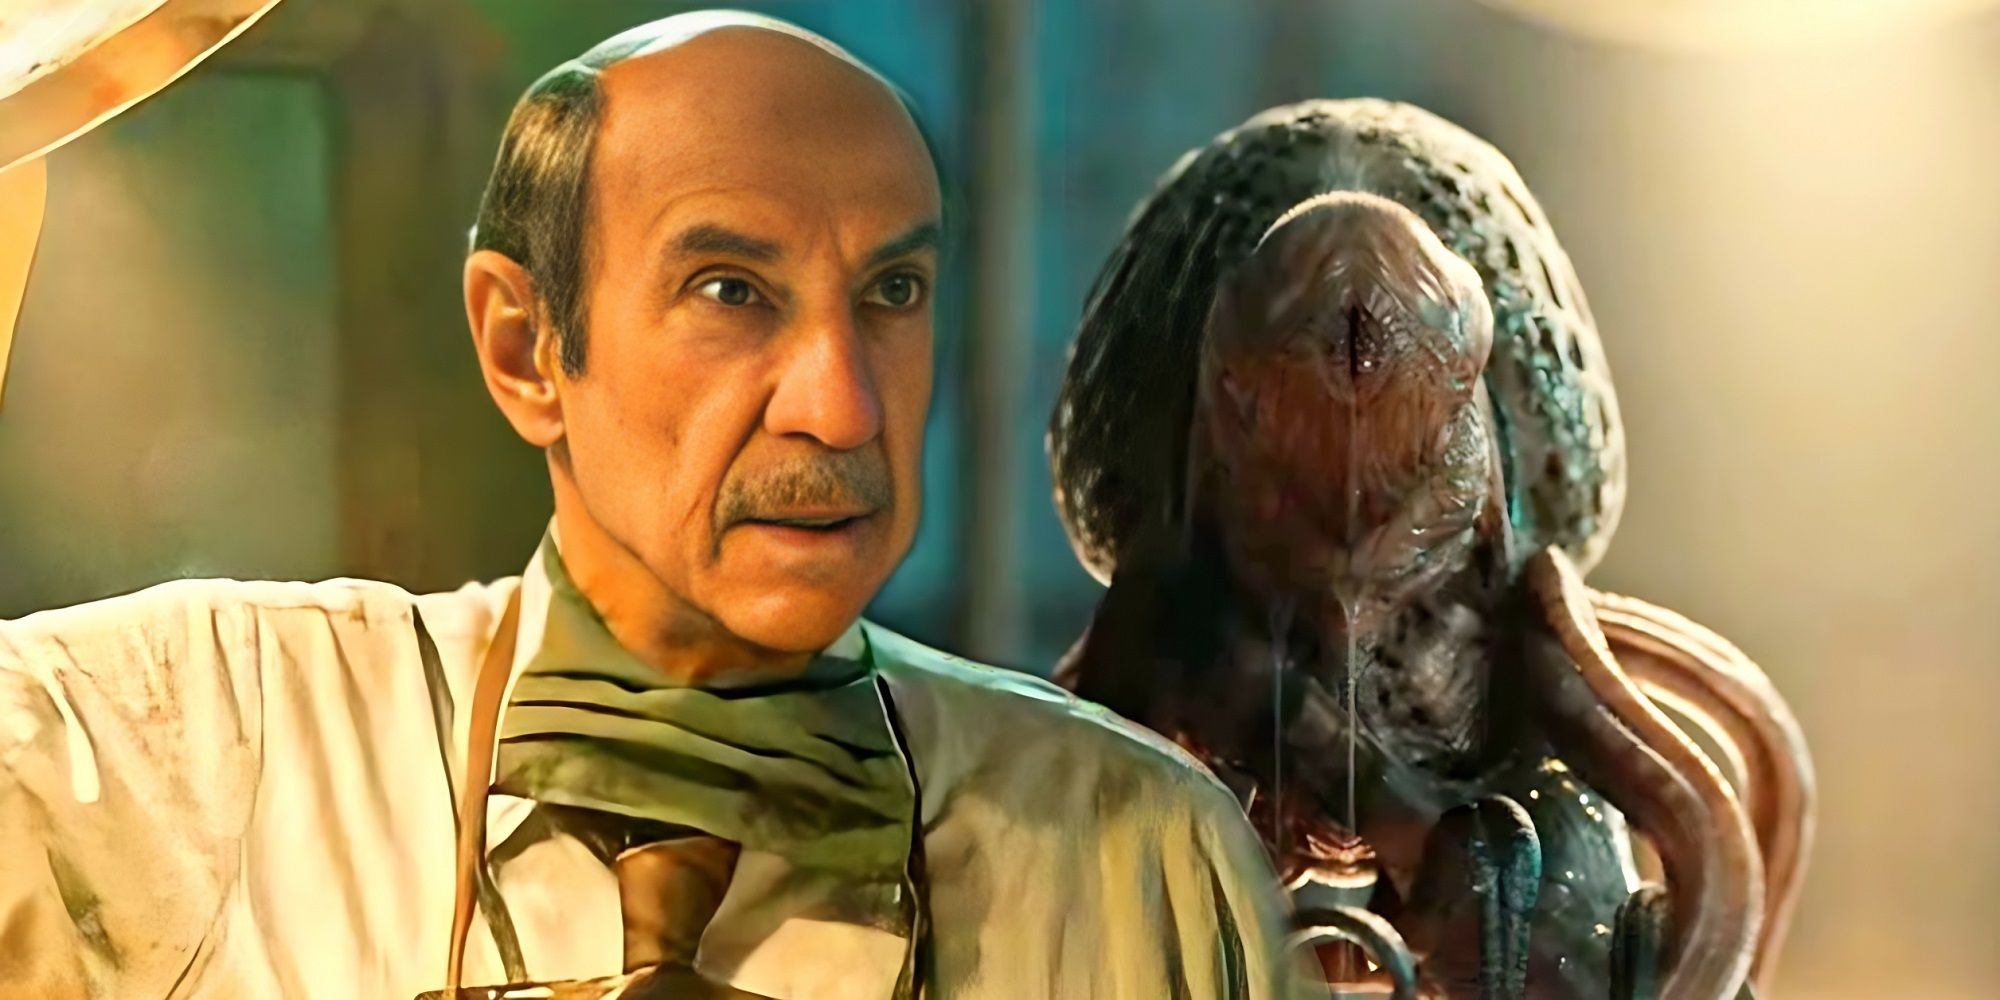 F. Murray Abraham as Carl with Alien in Cabinet of Curiosities The Autopsy